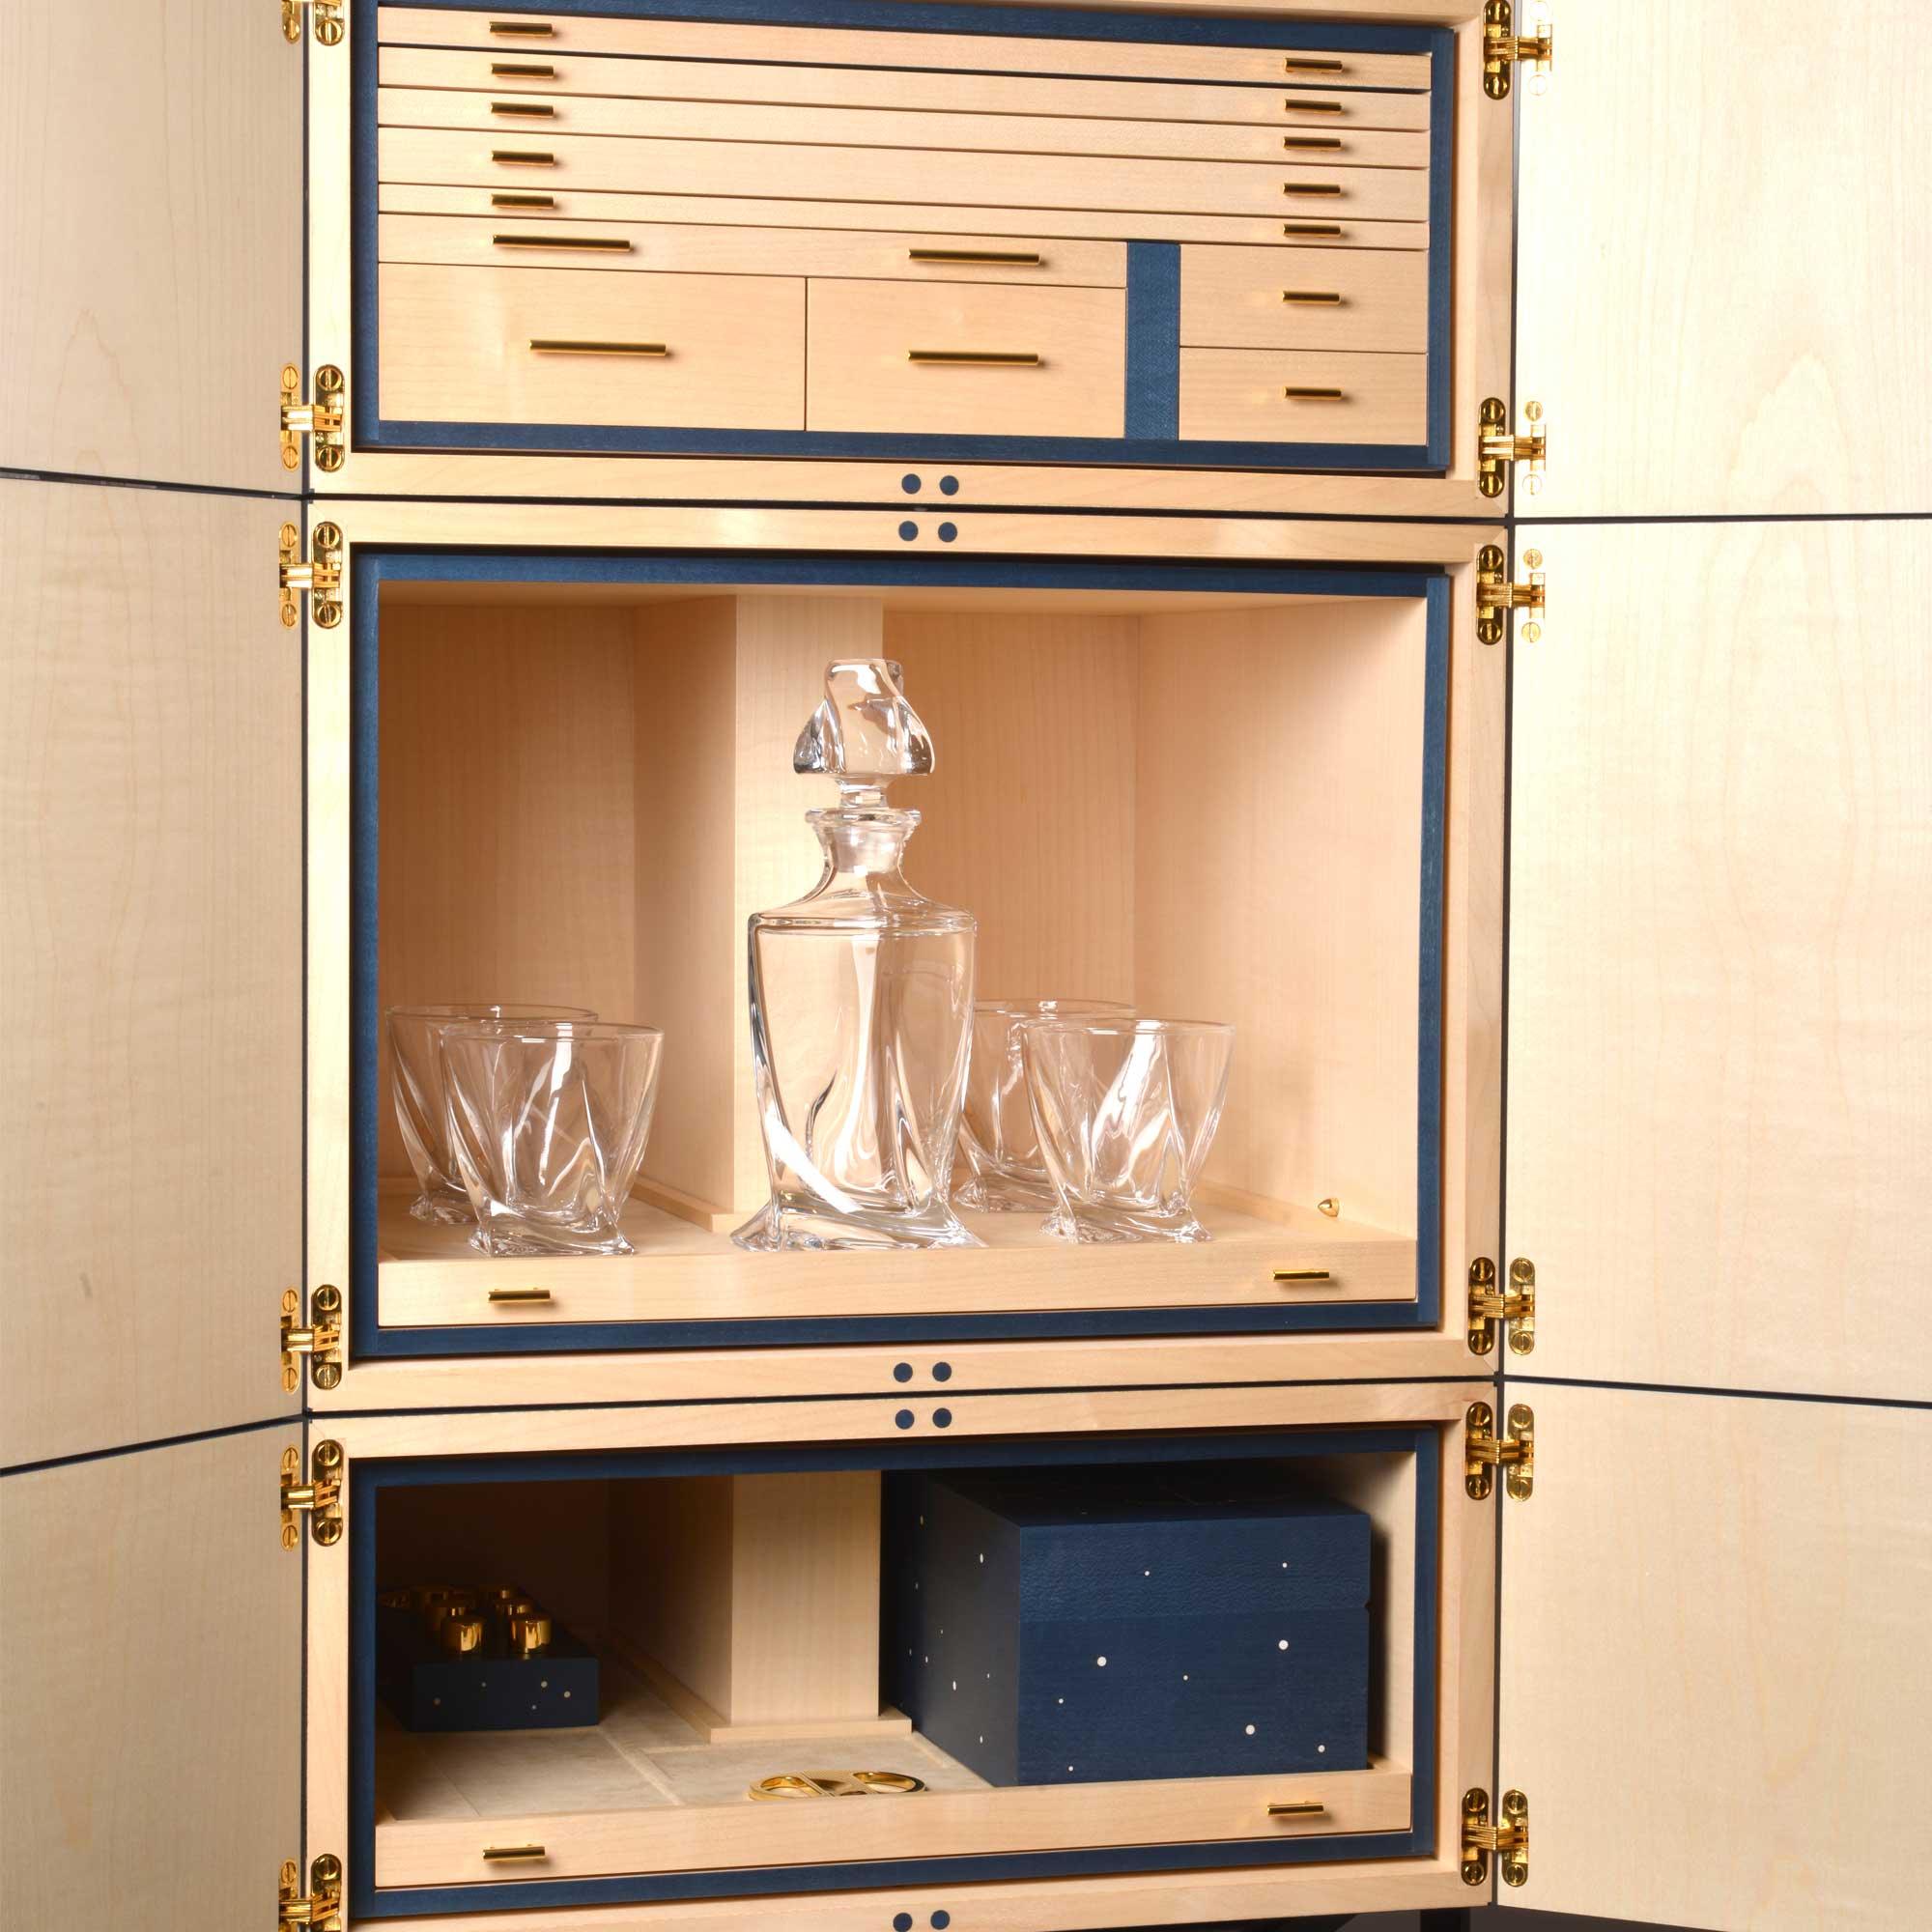 "Epicure" - Play cabinet